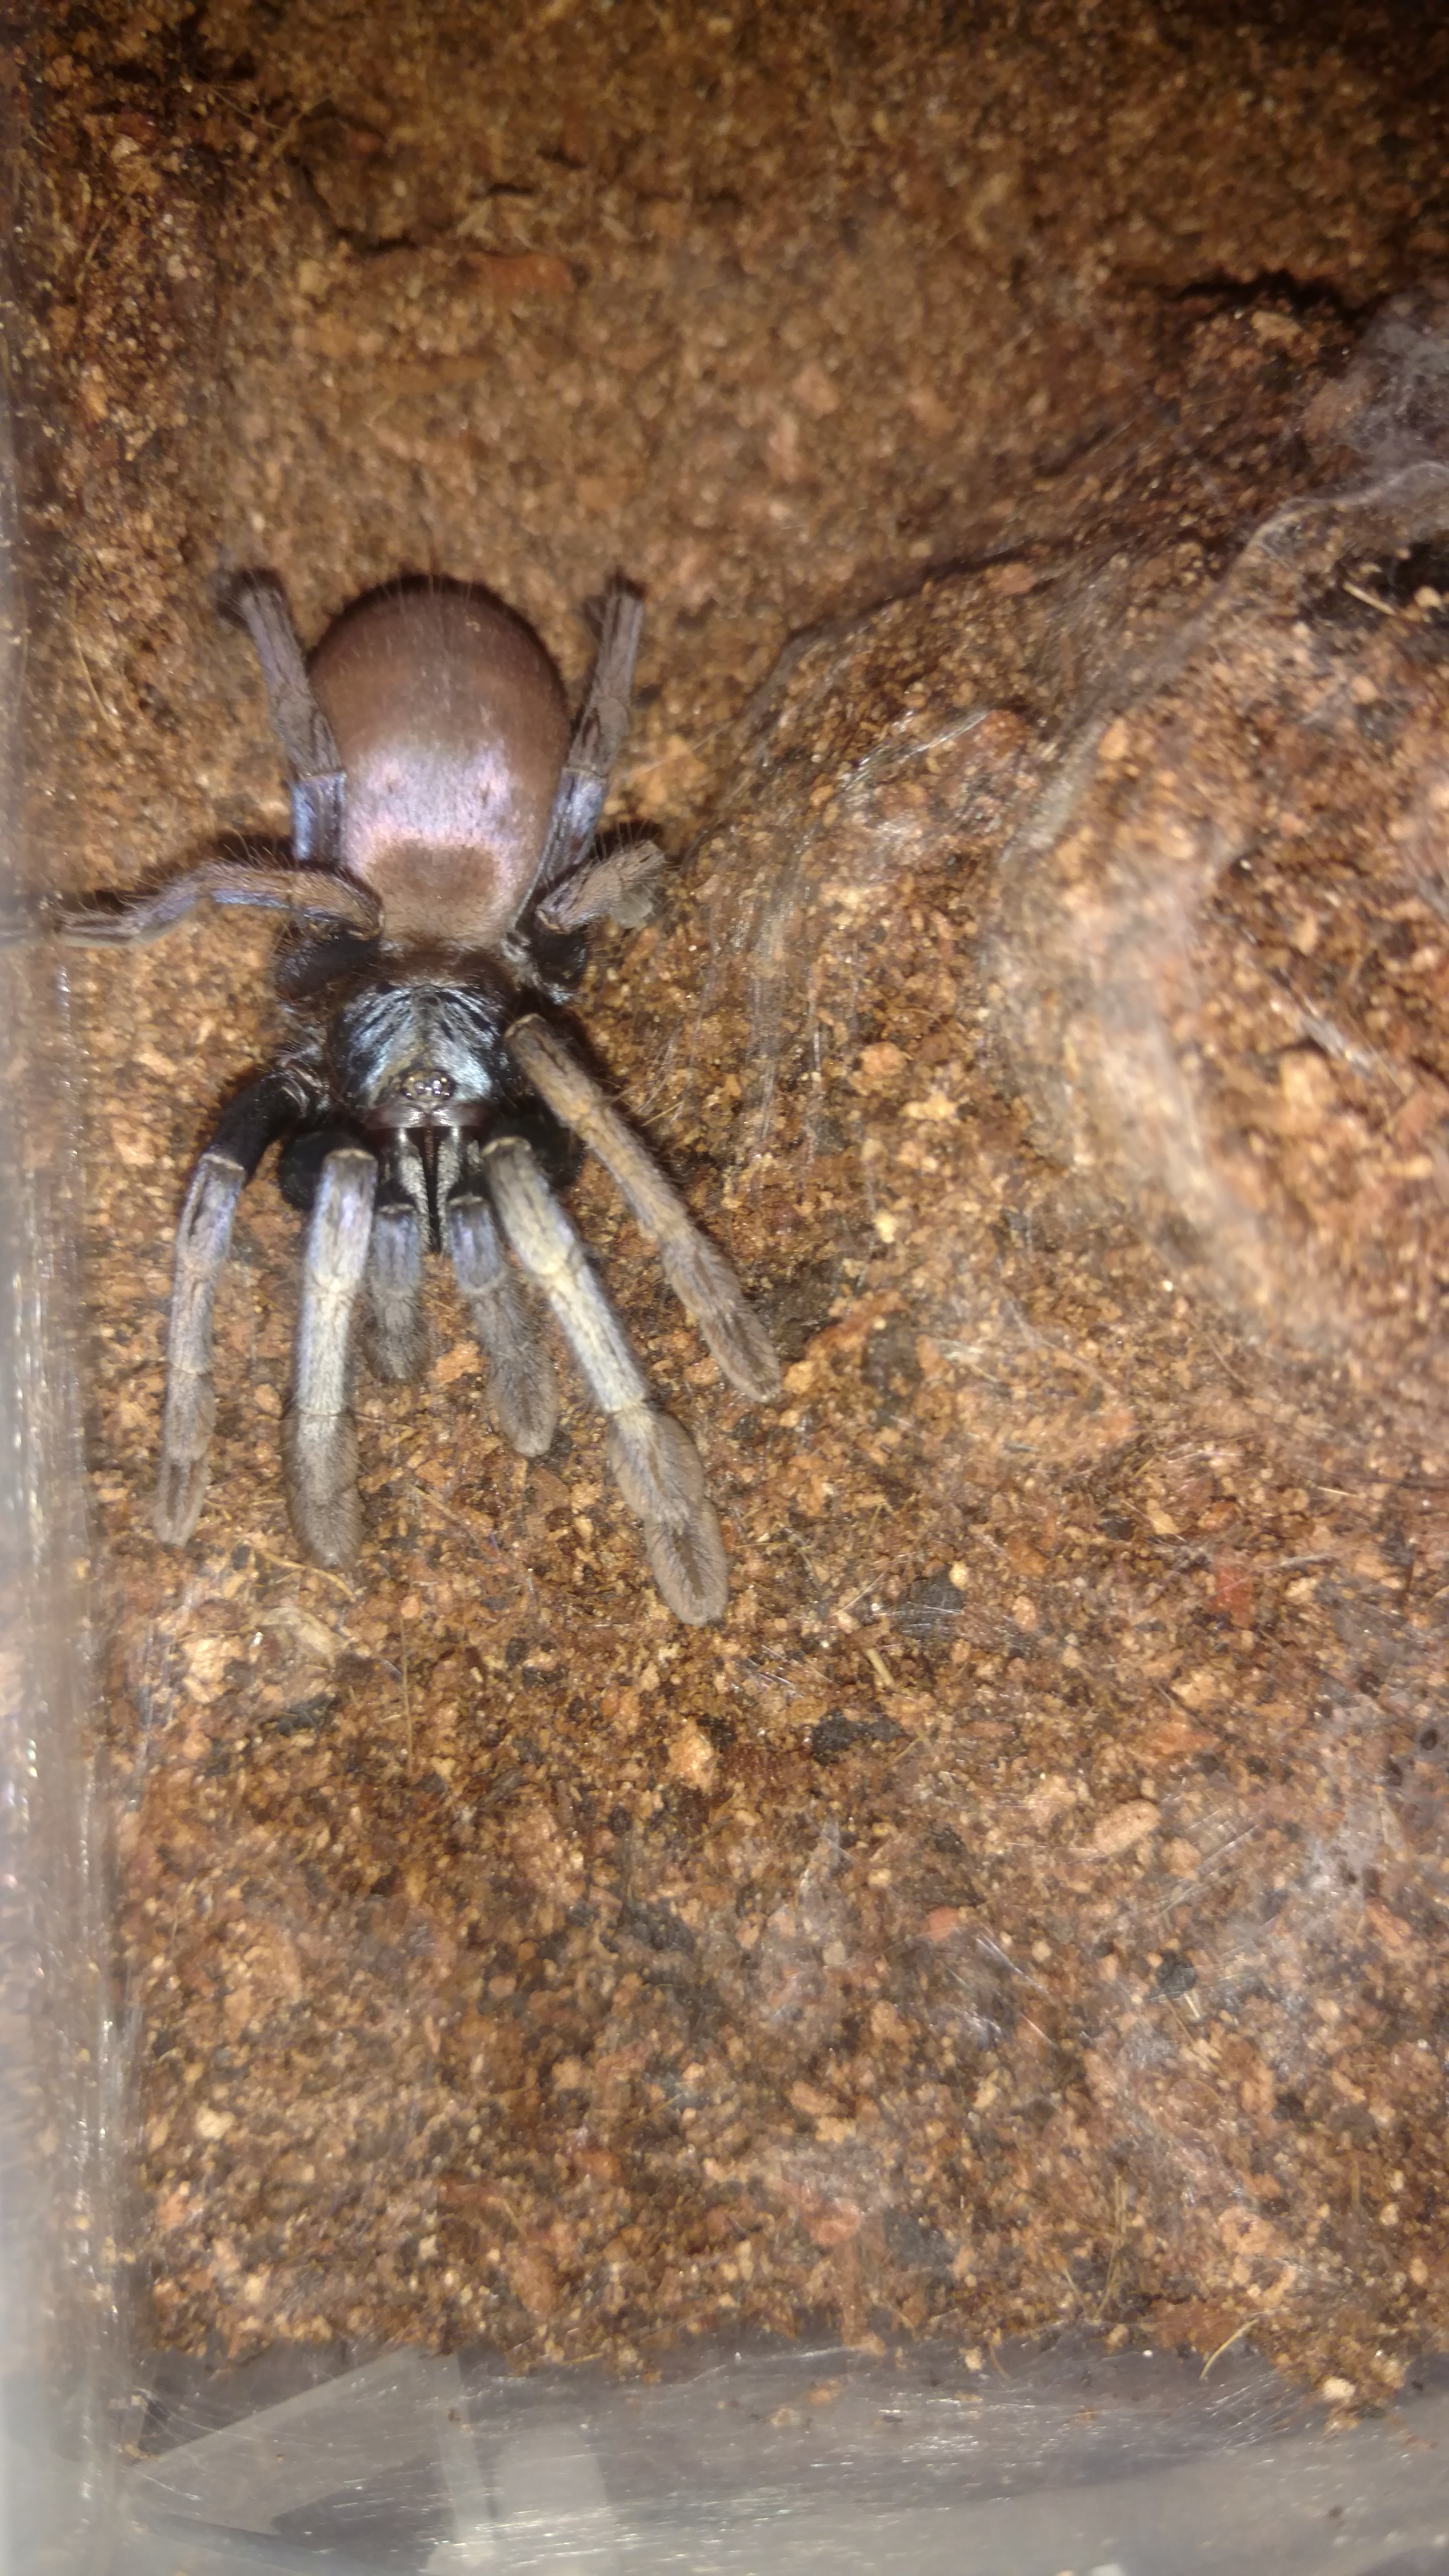 Another female T. psychedelicus